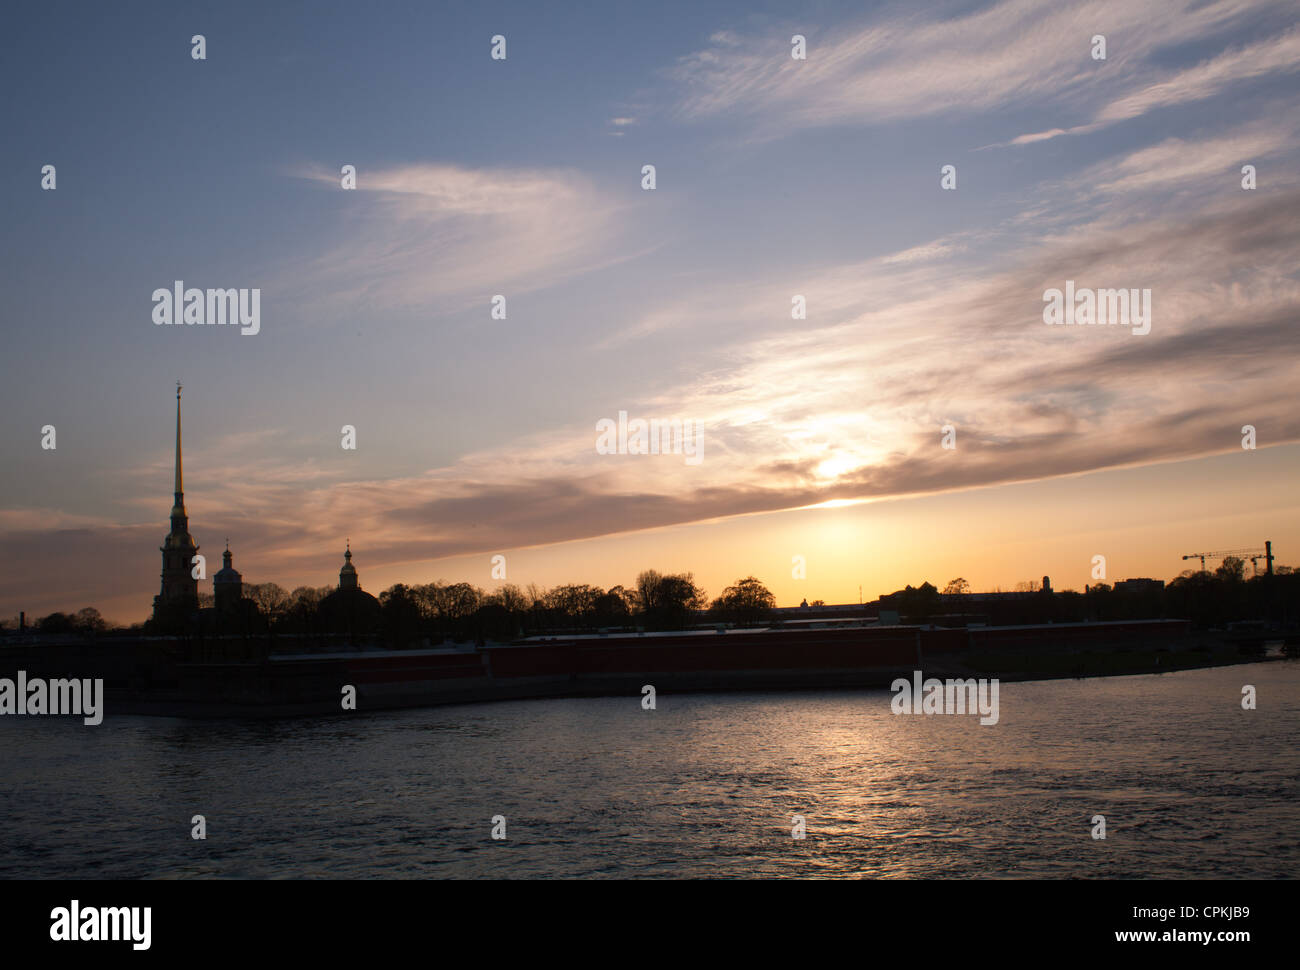 Peter and Paul Fortress in St. Petersburg, Russia. Stock Photo